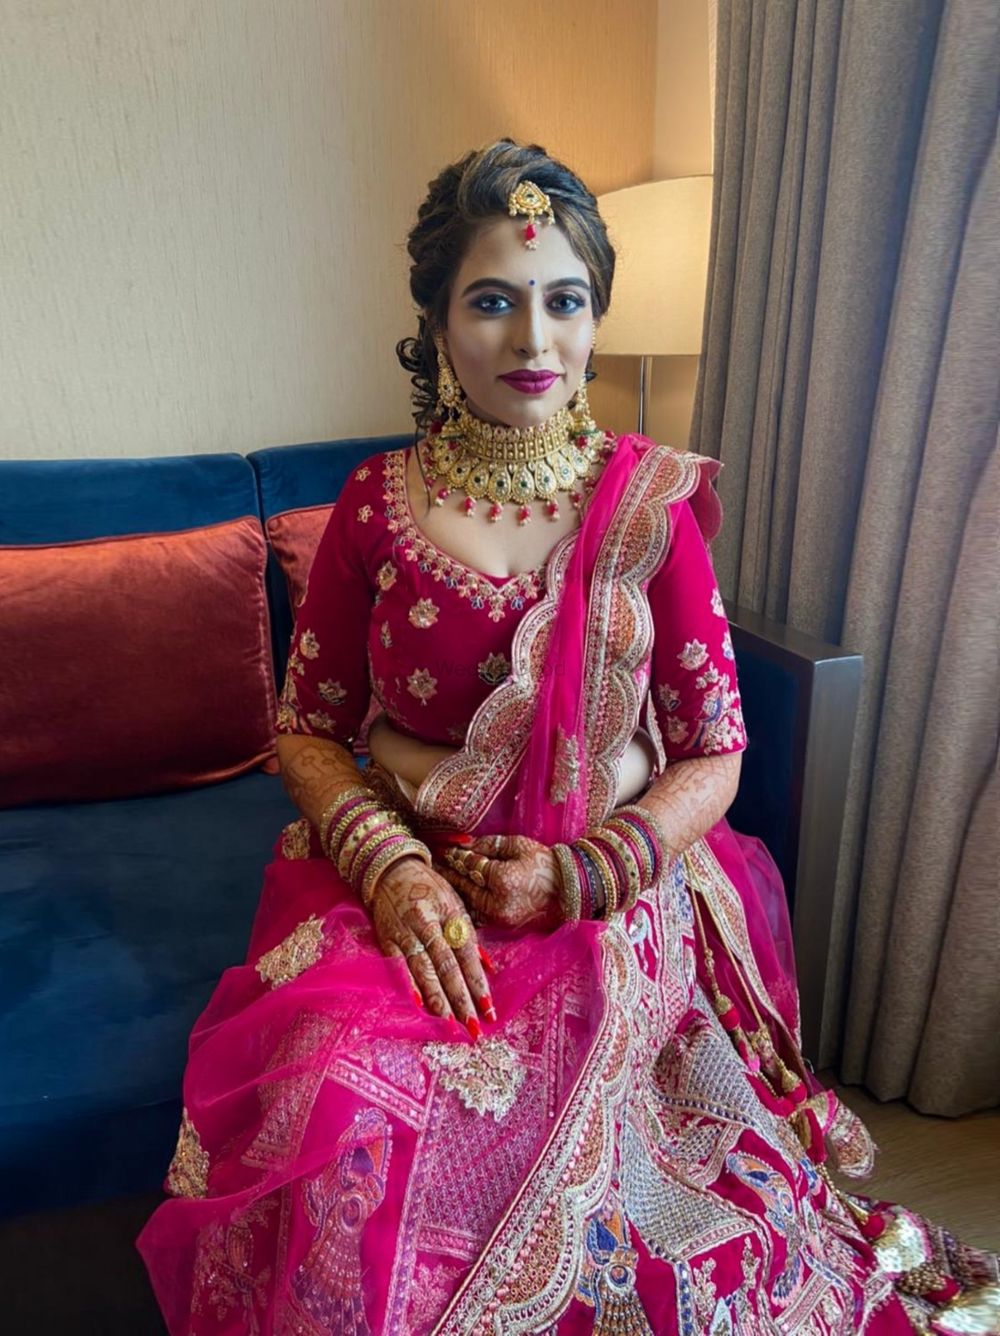 Photo From Reception and Sangeet Brides - By Makeovers by Jyoti Bhansali